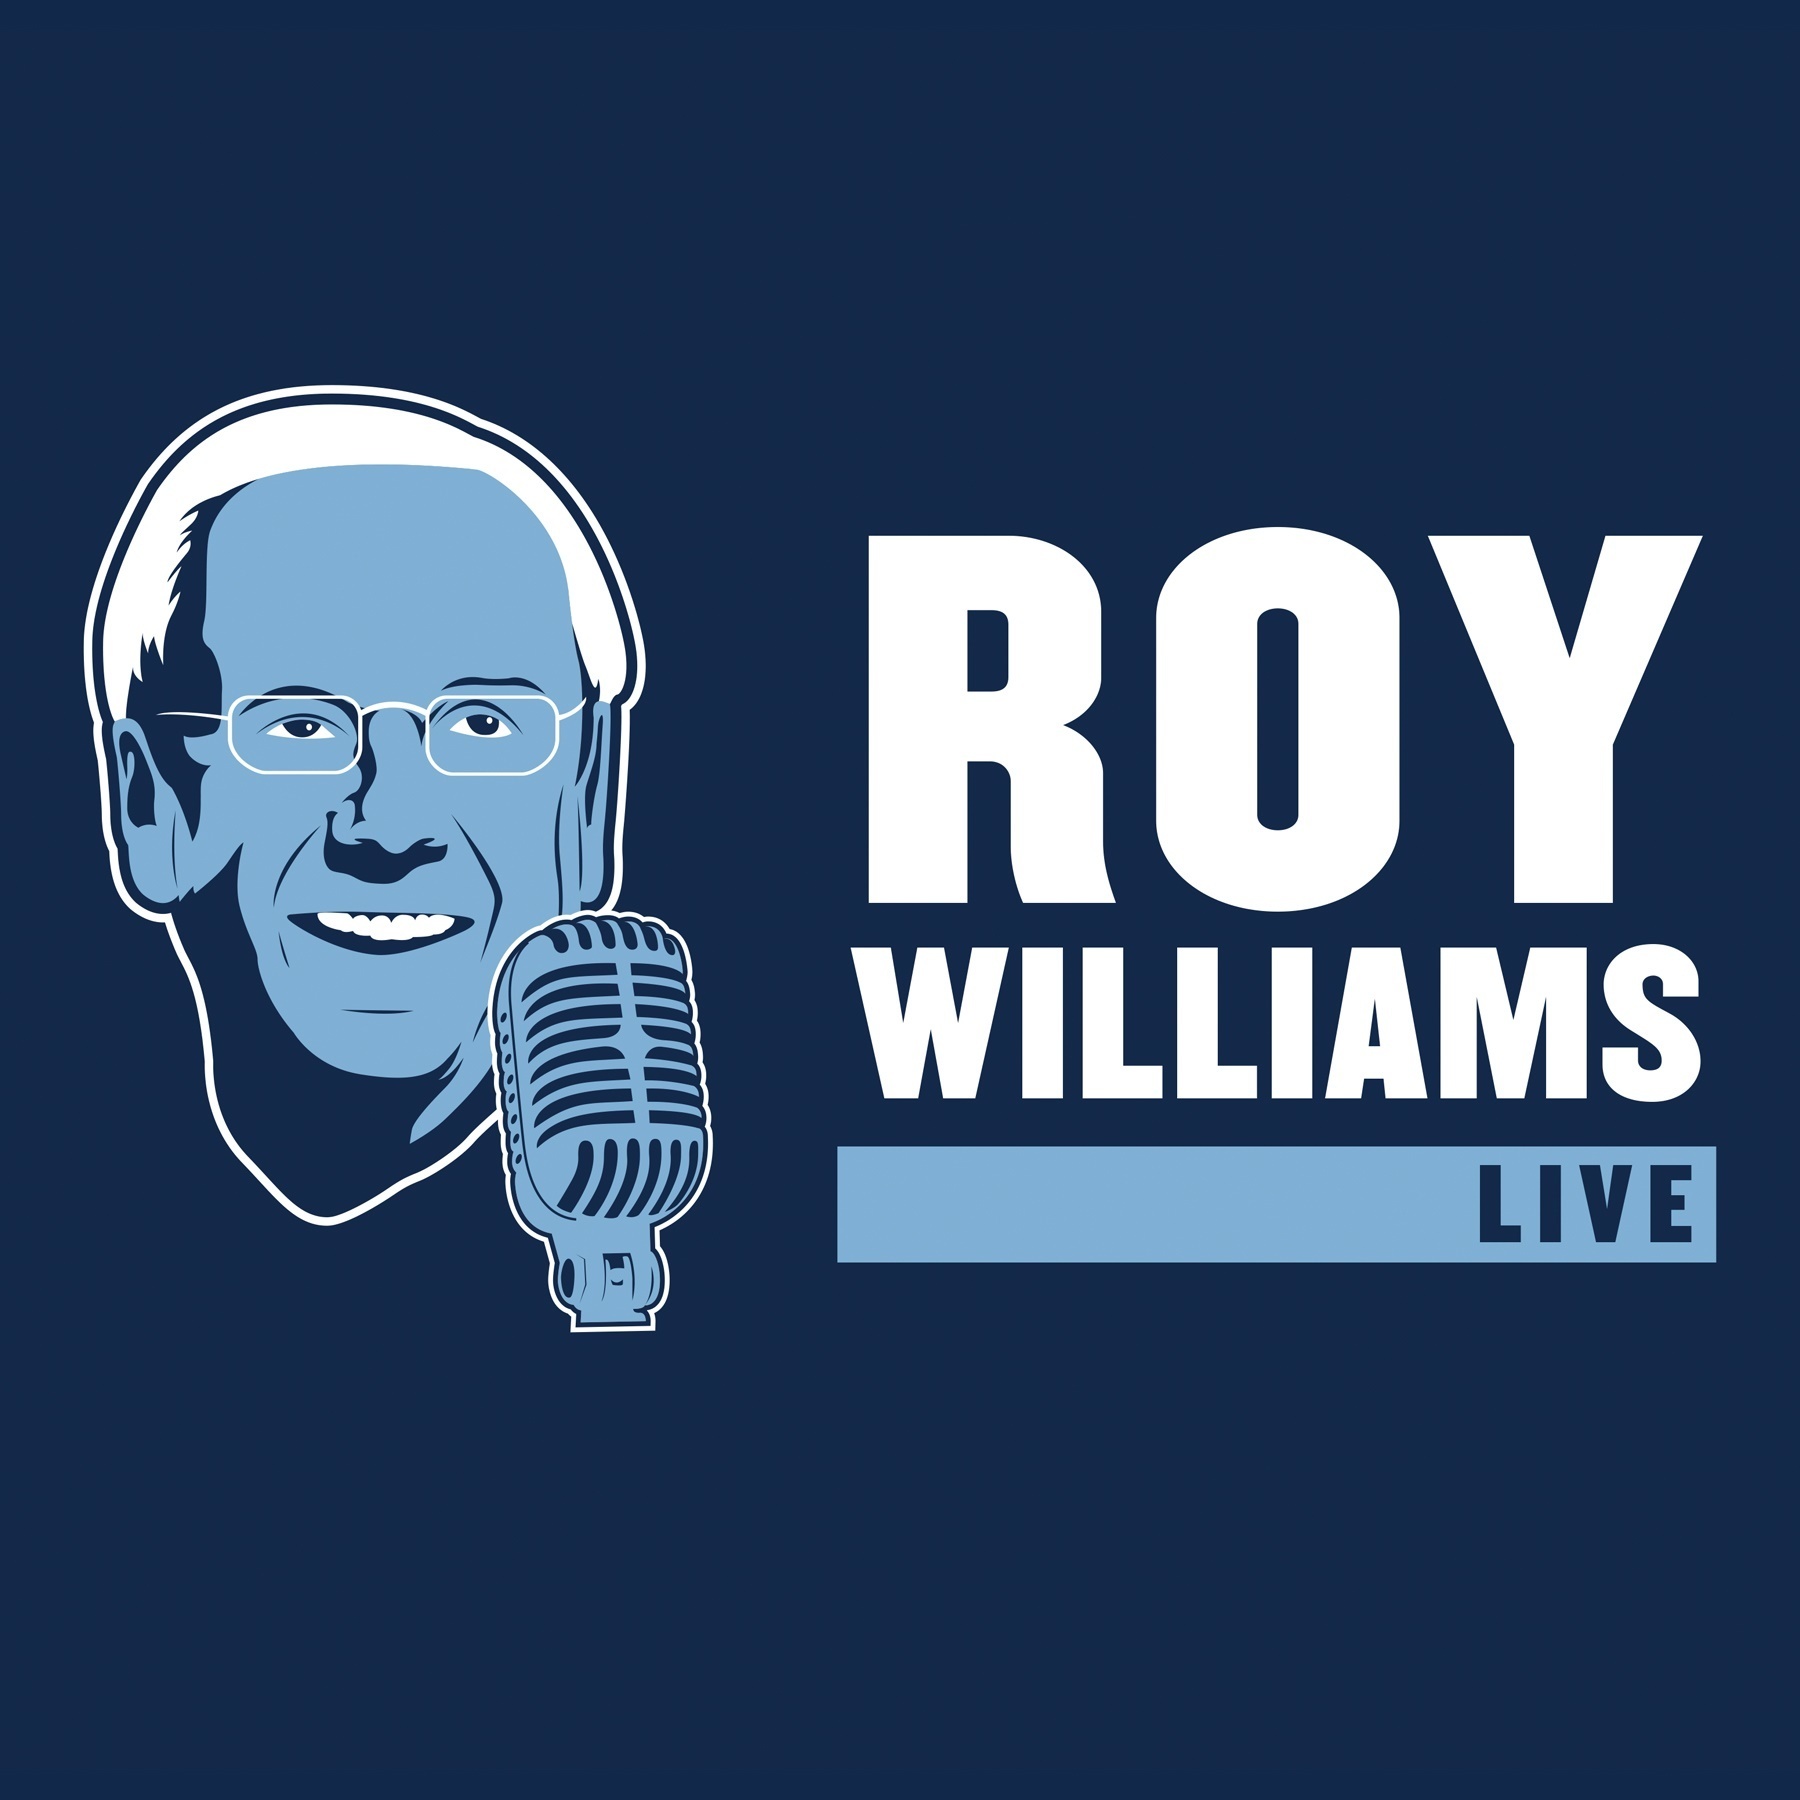 Roy Williams Live from 11/26/2018